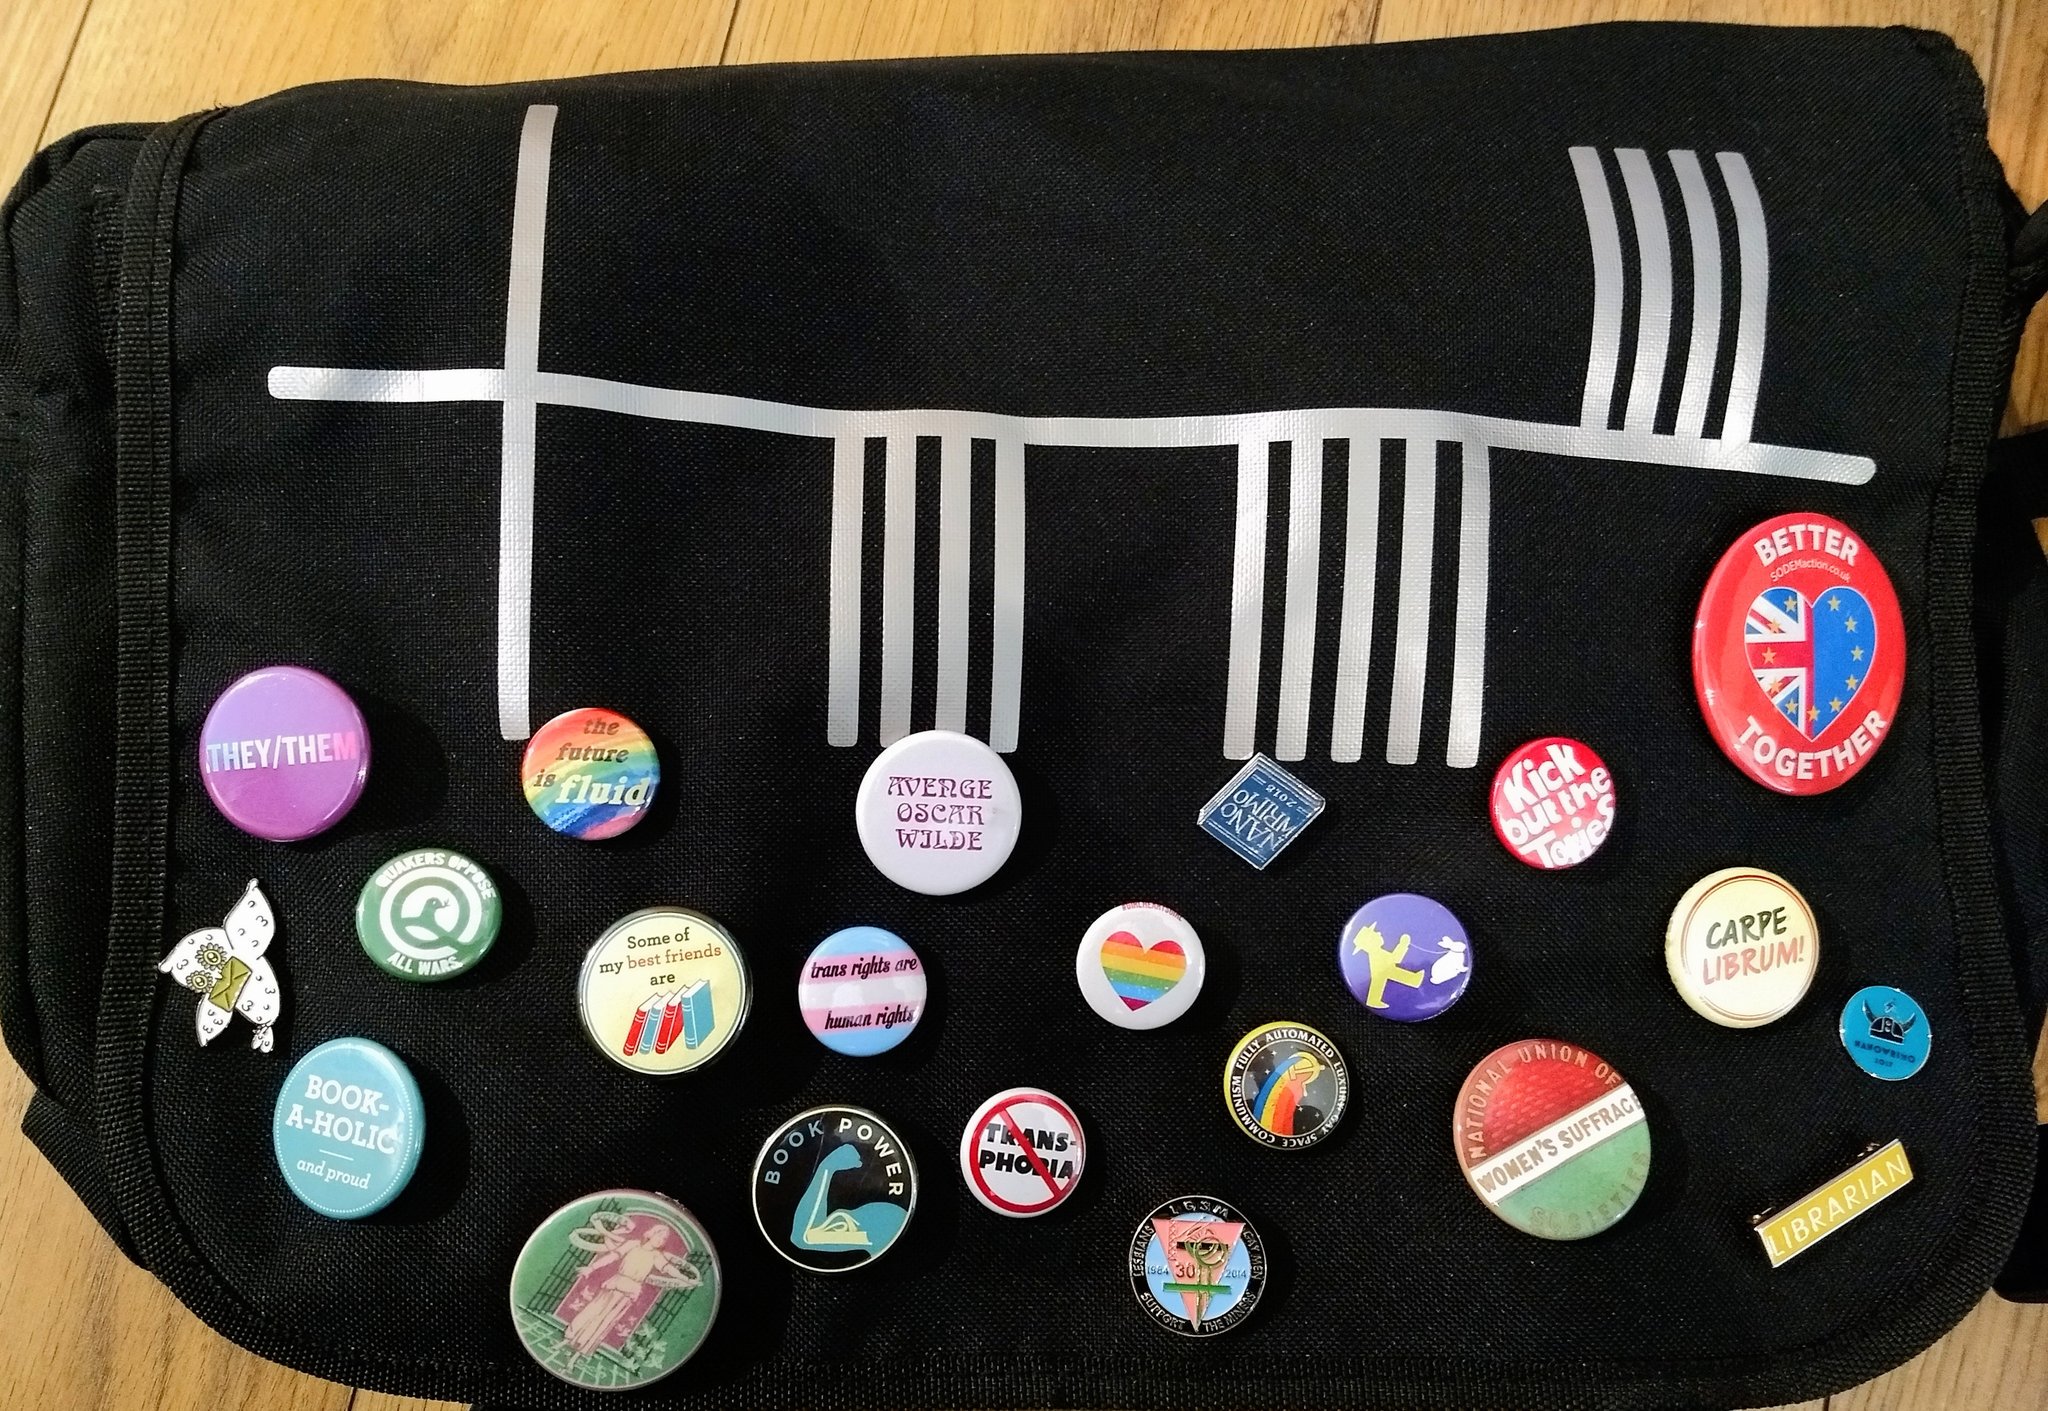 A black satchel covered in pin badges. Slogans include "trans rights are human rights", "avenge Oscar Wilde", "kick out the Tories" and "Quakers oppose all wars".